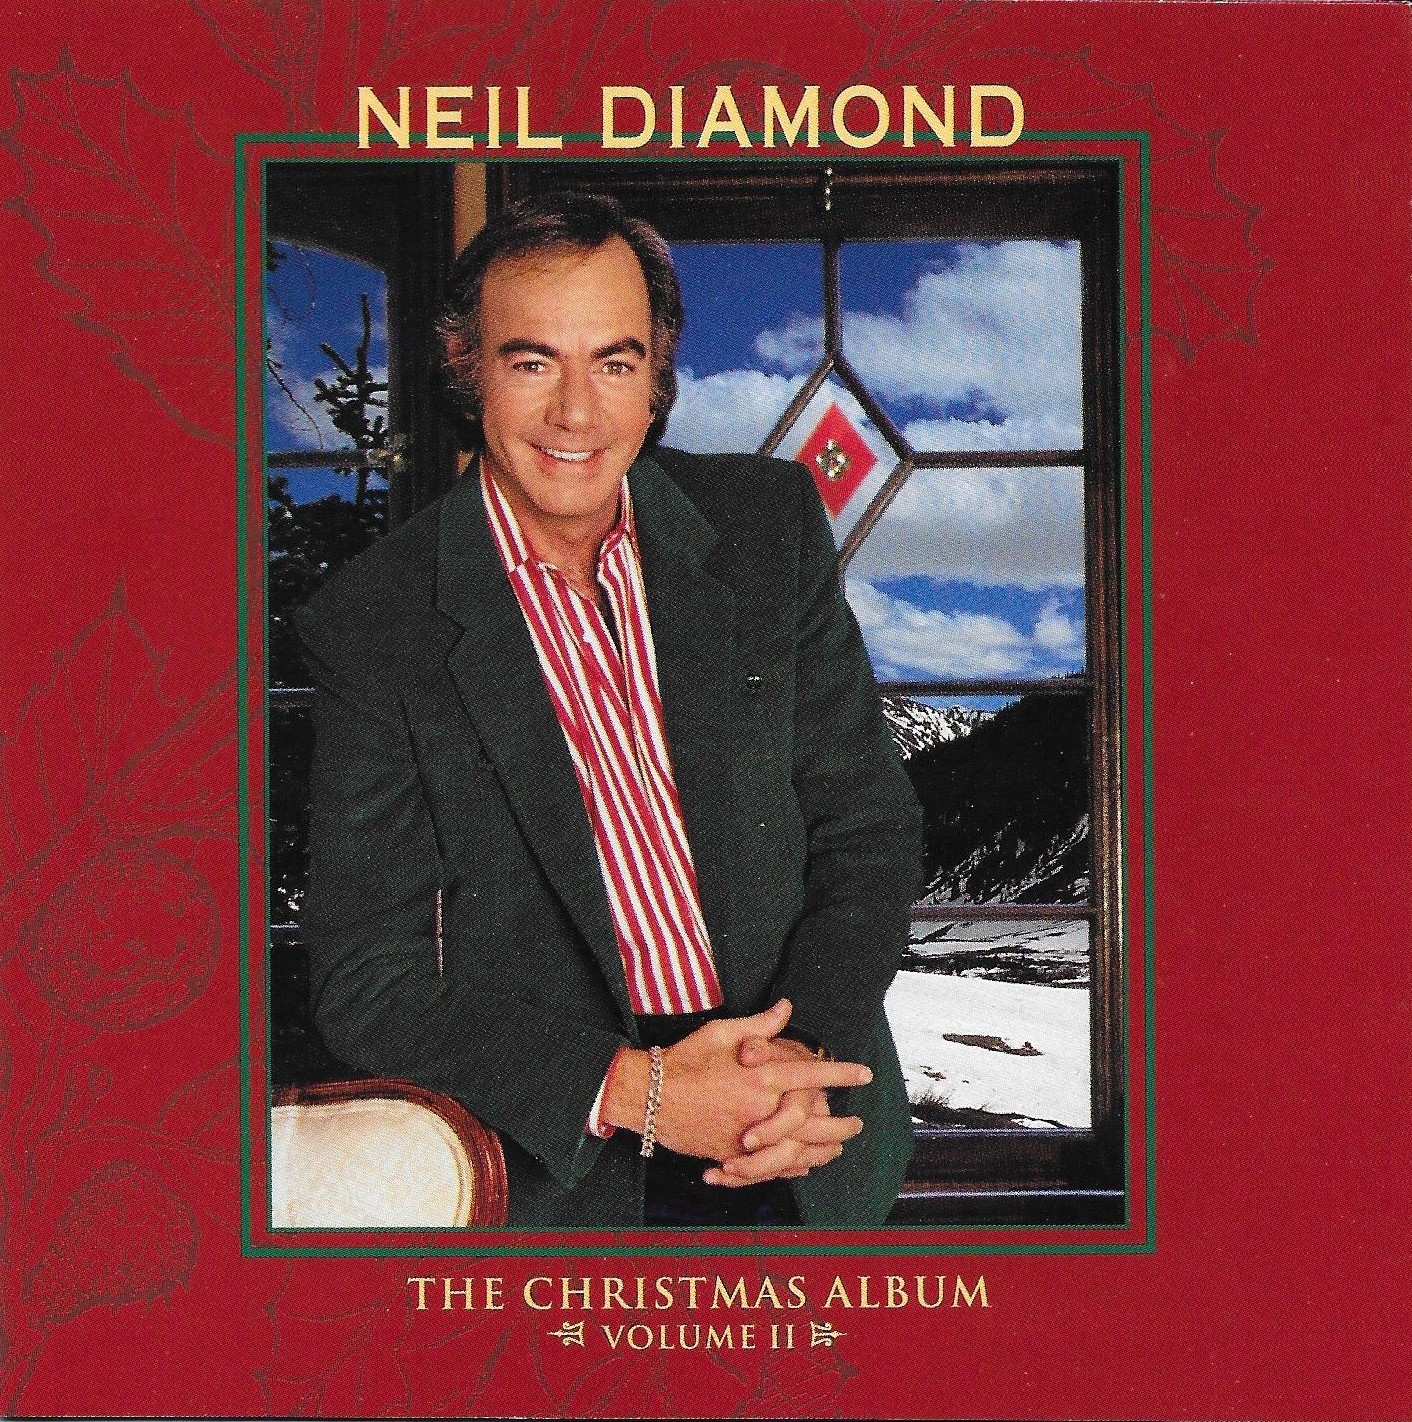 Art for Mary's Little Boy Child by Neil Diamond